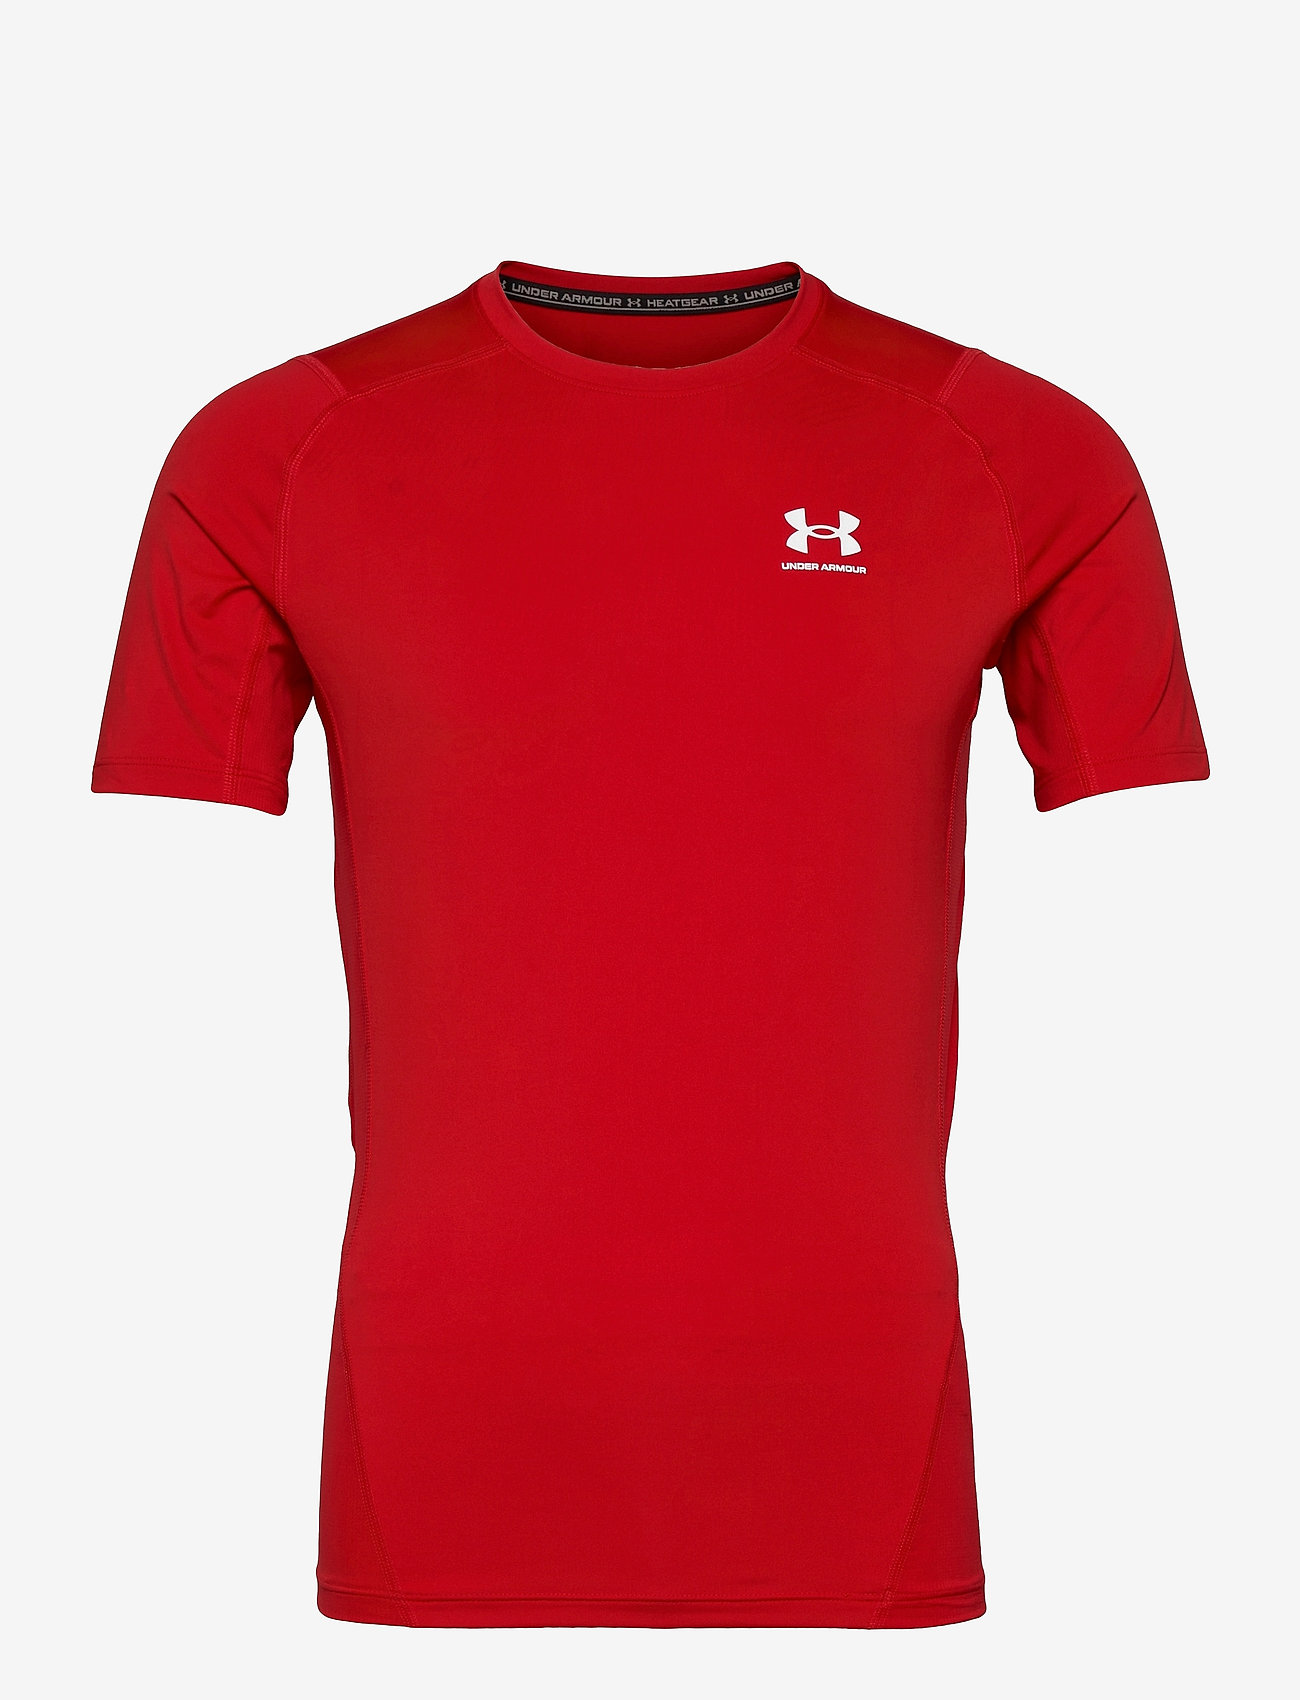 Under Armour - UA HG Armour Comp SS - oberteile & t-shirts - red - 0